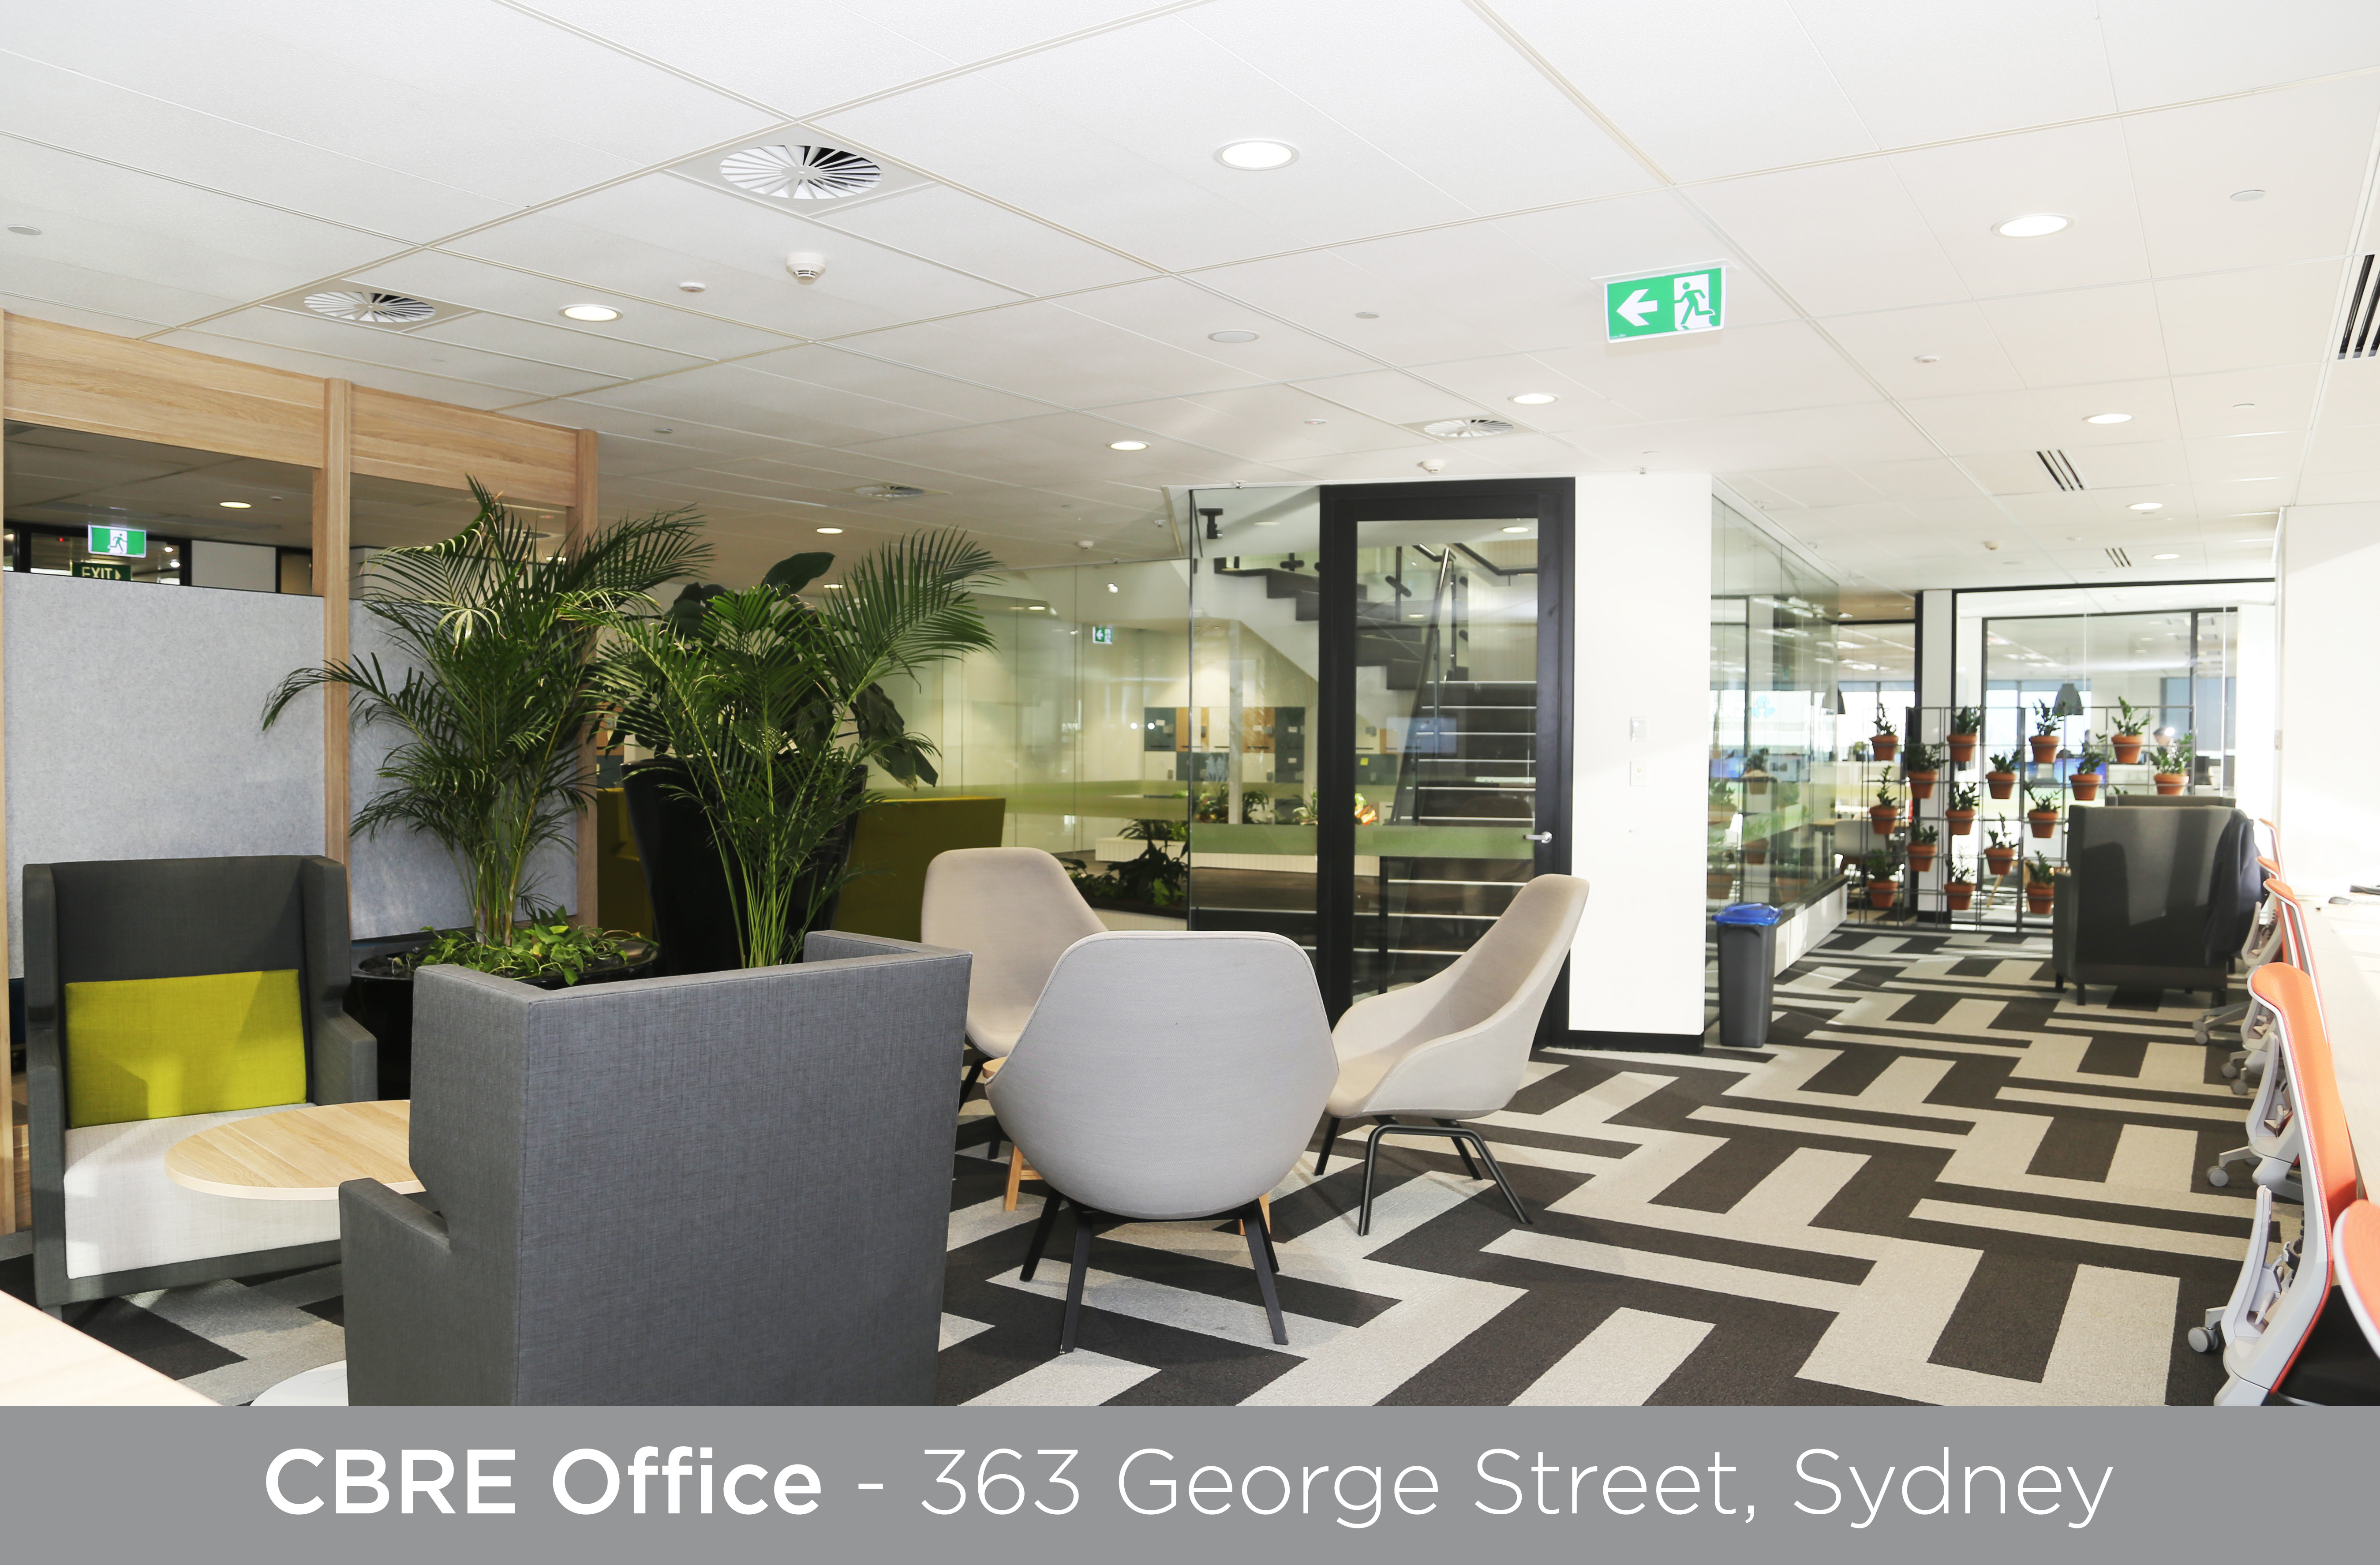 Why CBRE s new office is very WELL done - Property Council Australia